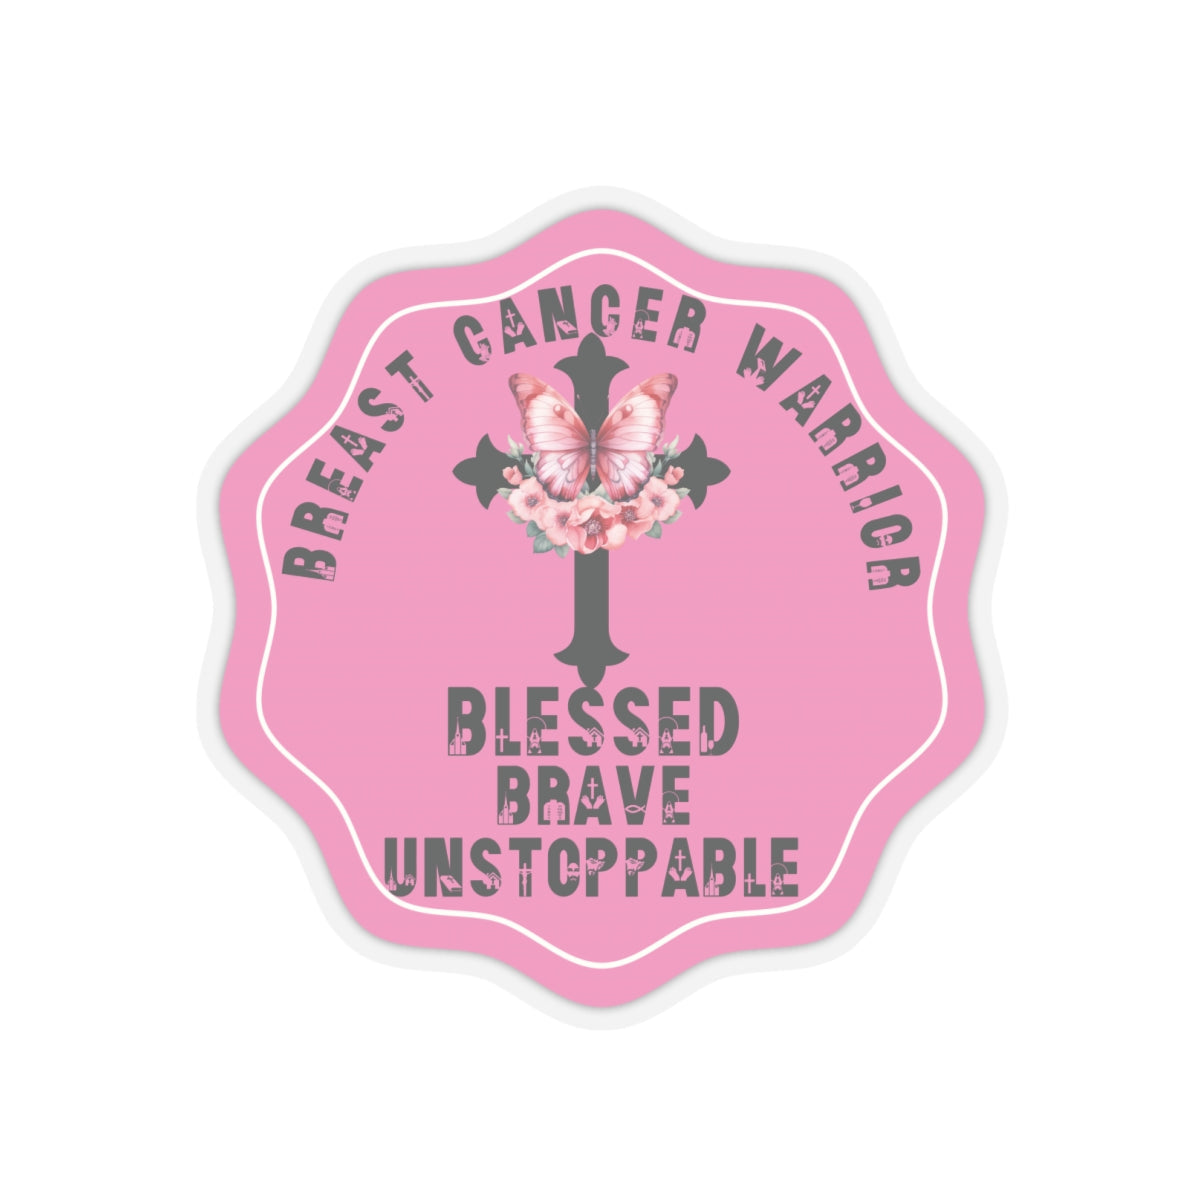 Blessed Breast Cancer Warrior Motivational Quote Kiss-Cut Stickers-Paper products-6" × 6"-Transparent-mysticalcherry